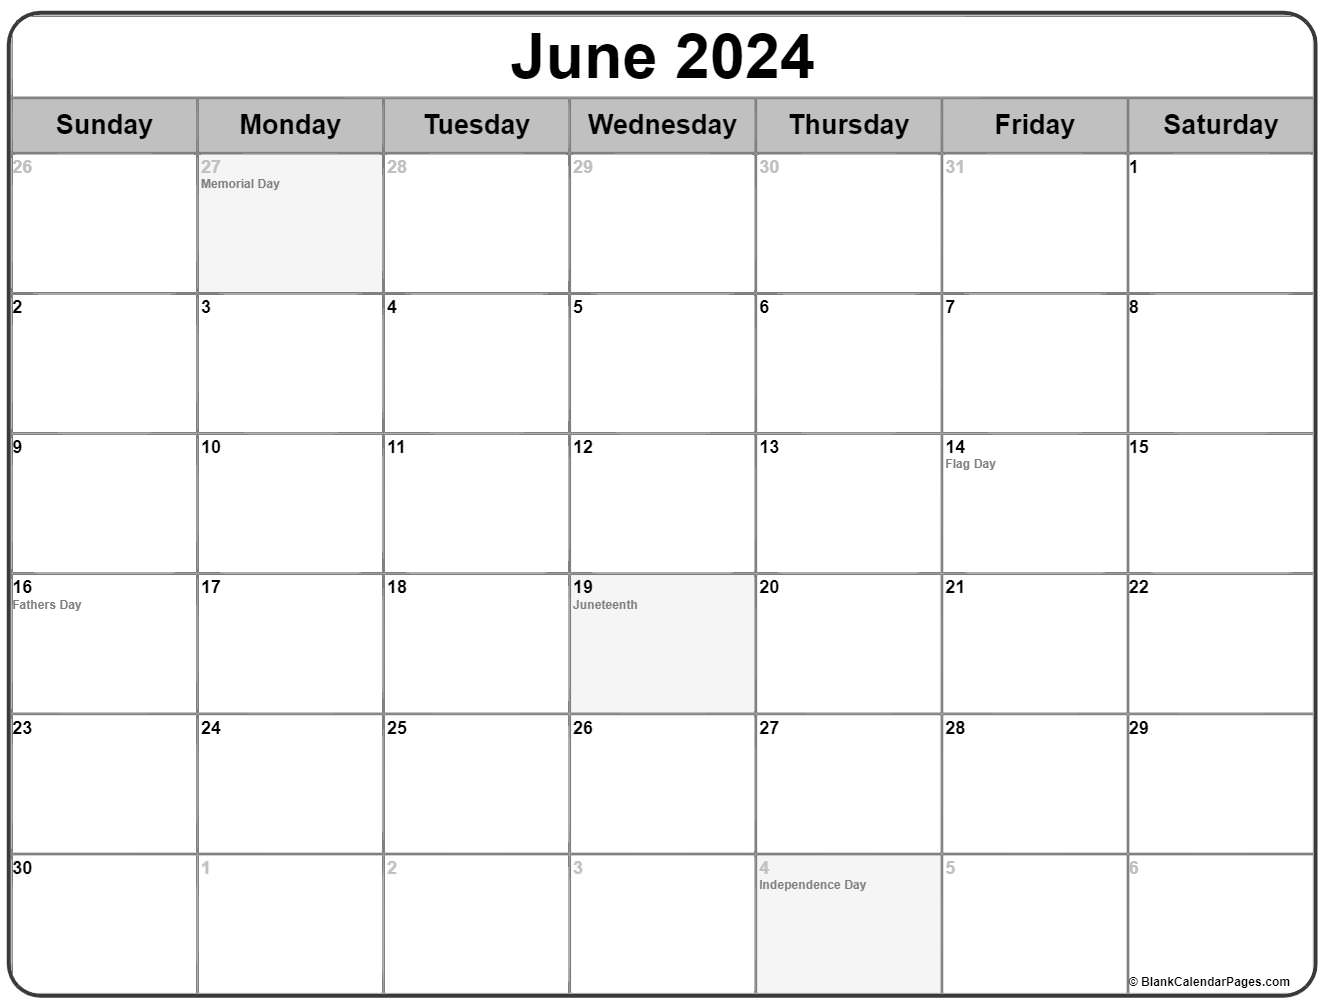 Collection of June 2021 calendars with holidays